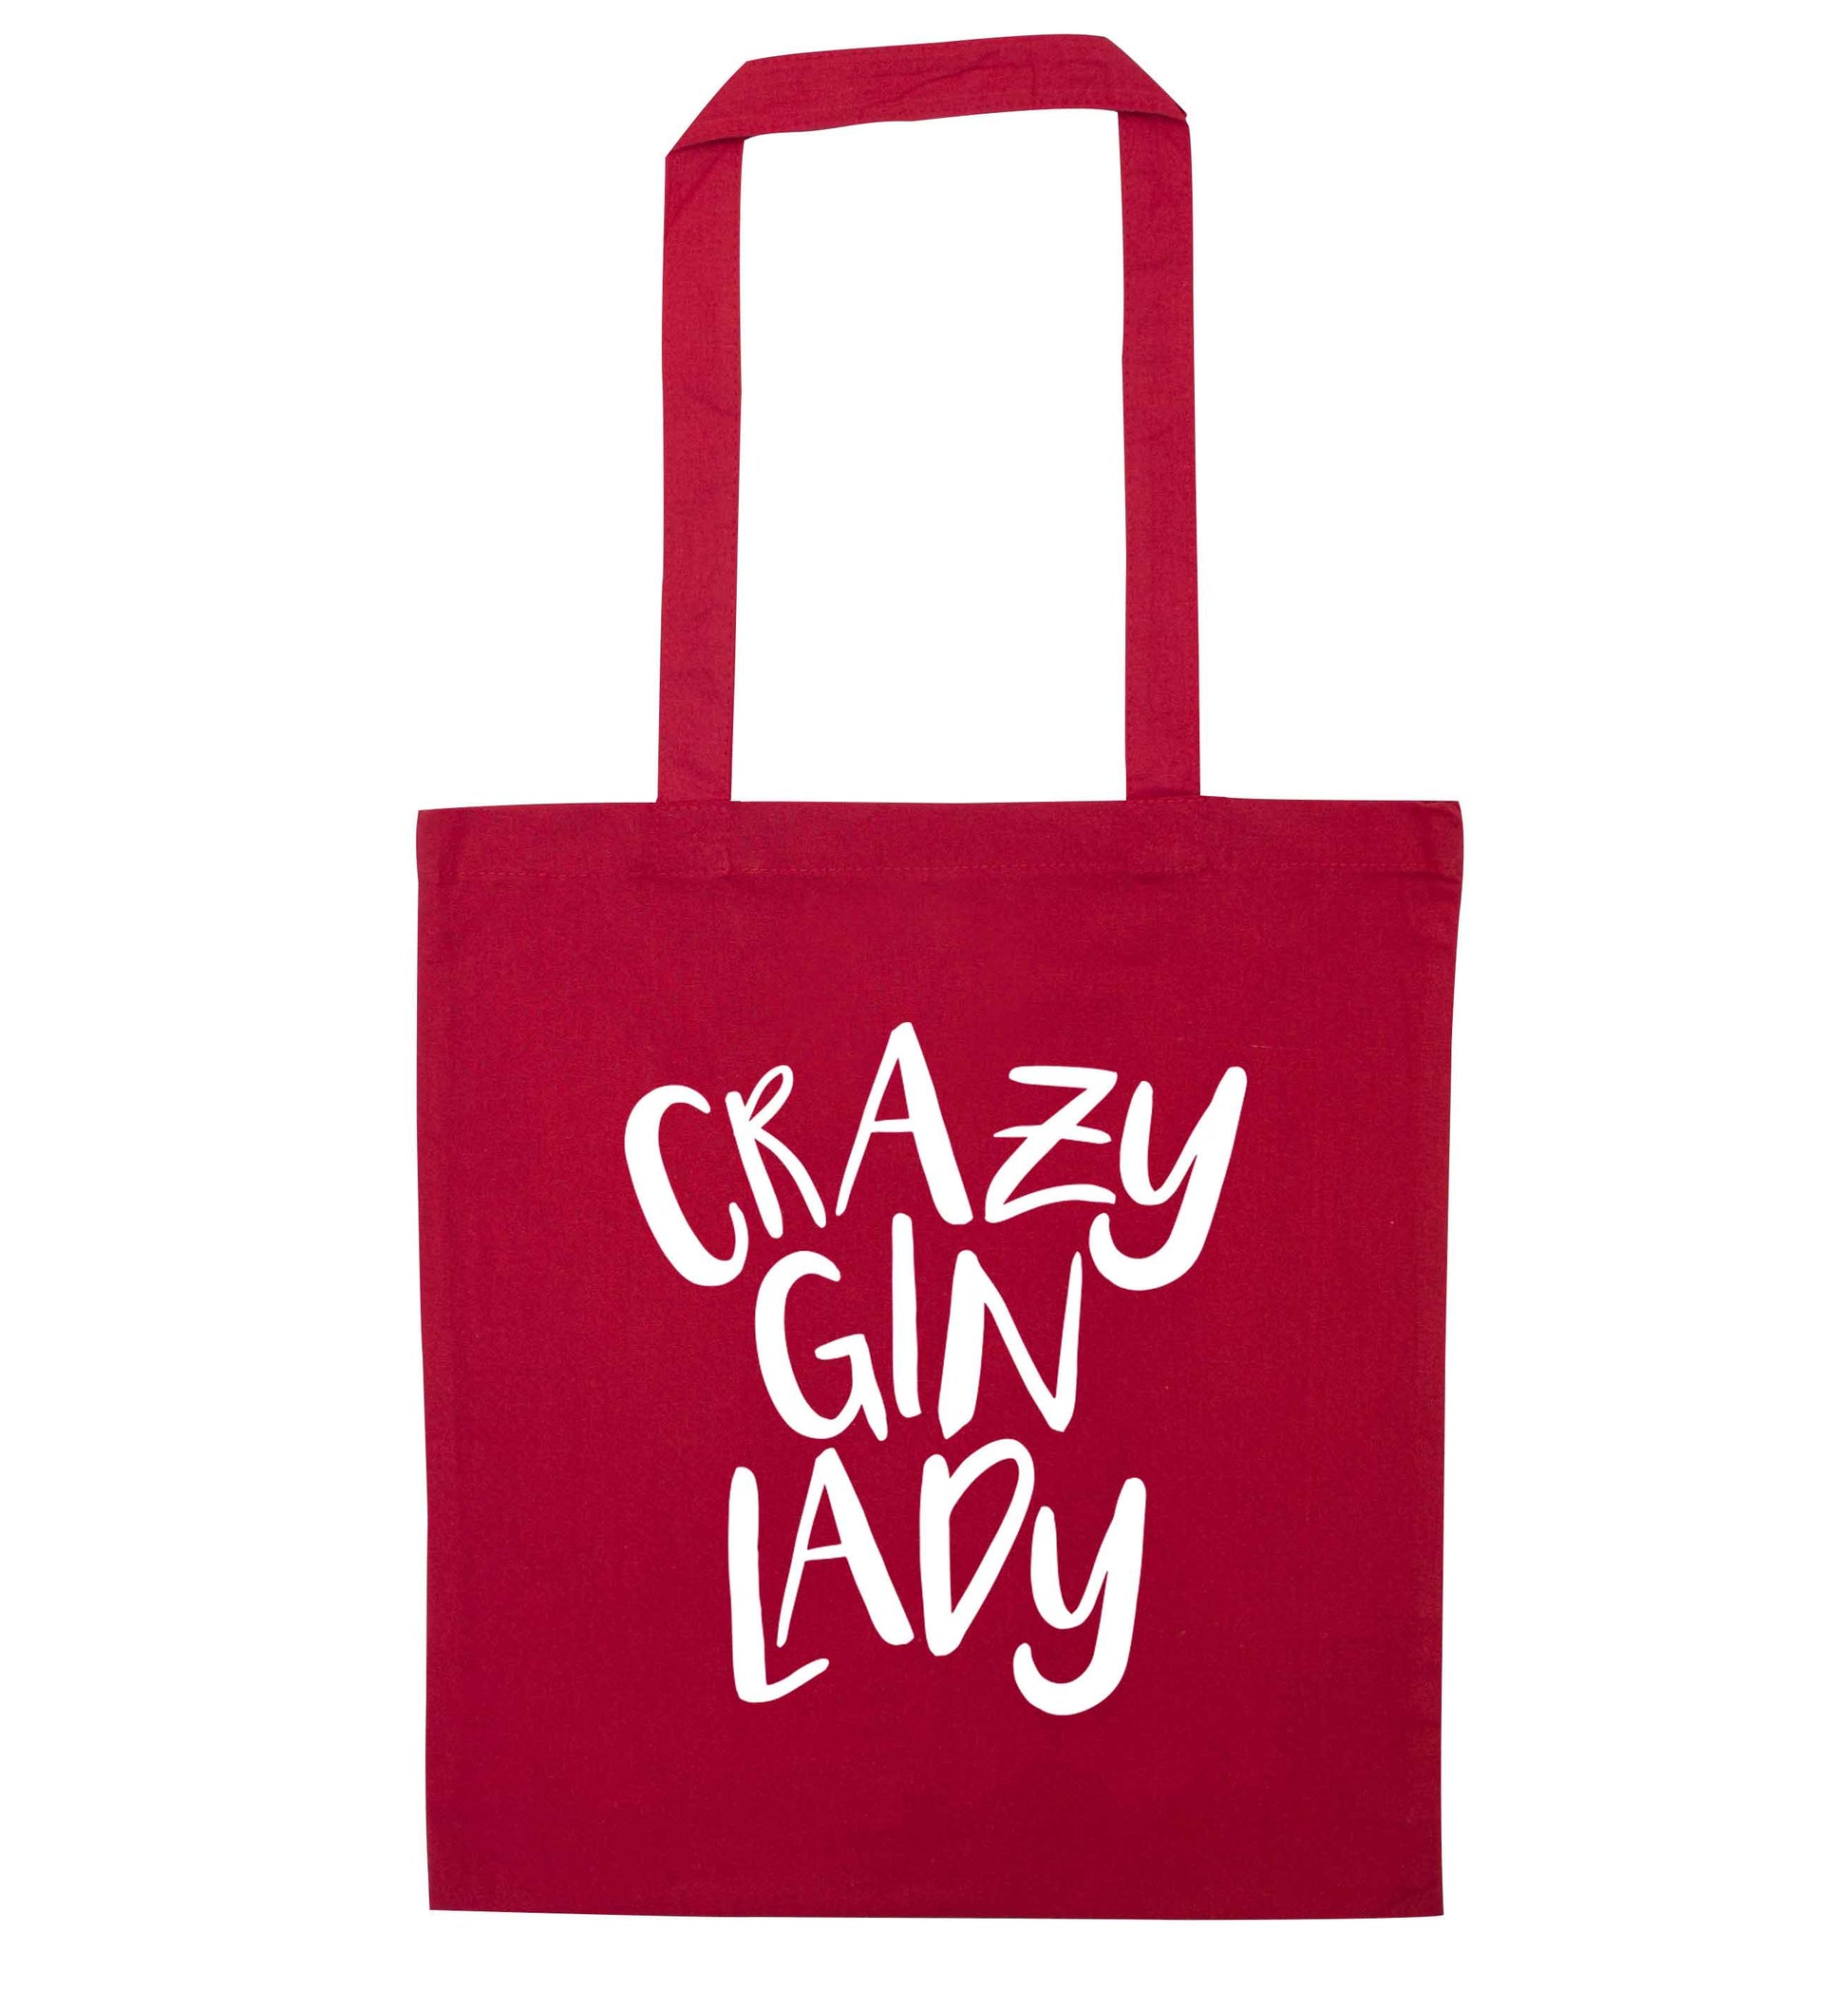 Crazy gin lady red tote bag